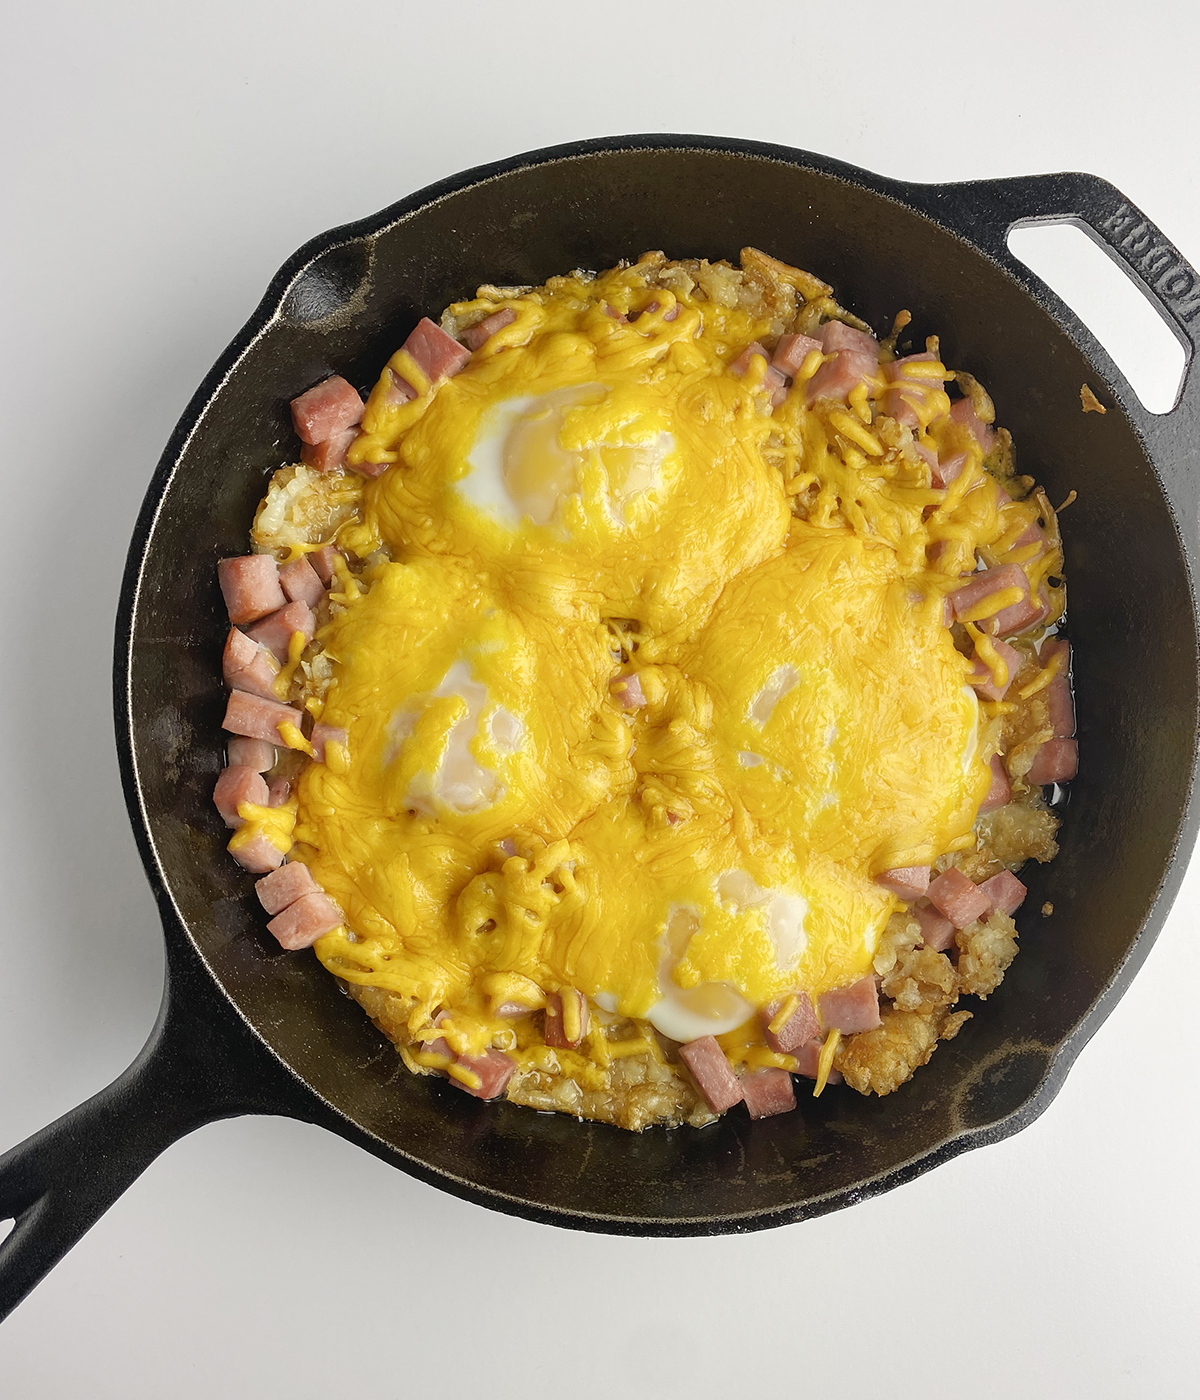 Ham and egg breakfast casserole in a skillet.